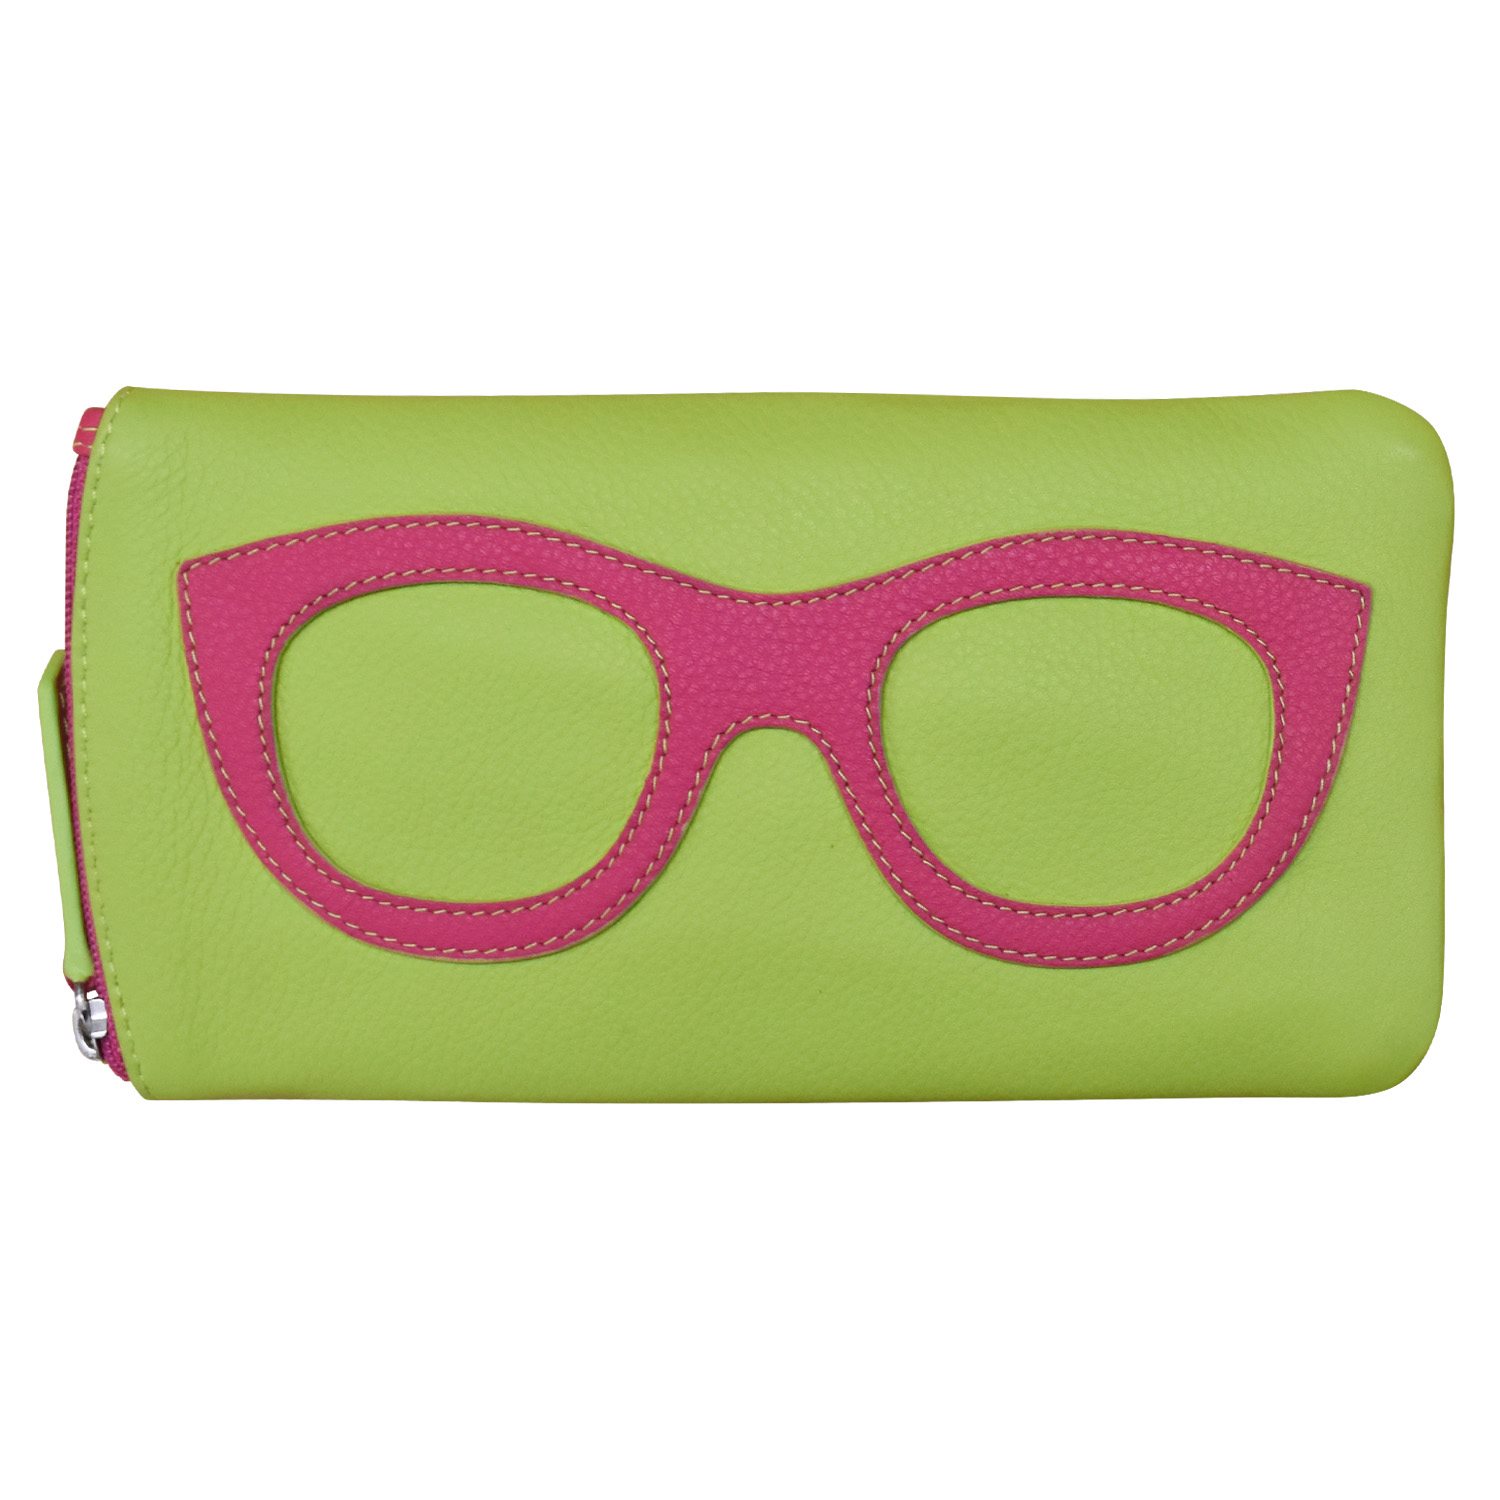 Eyeglass Case with Frame Graphic